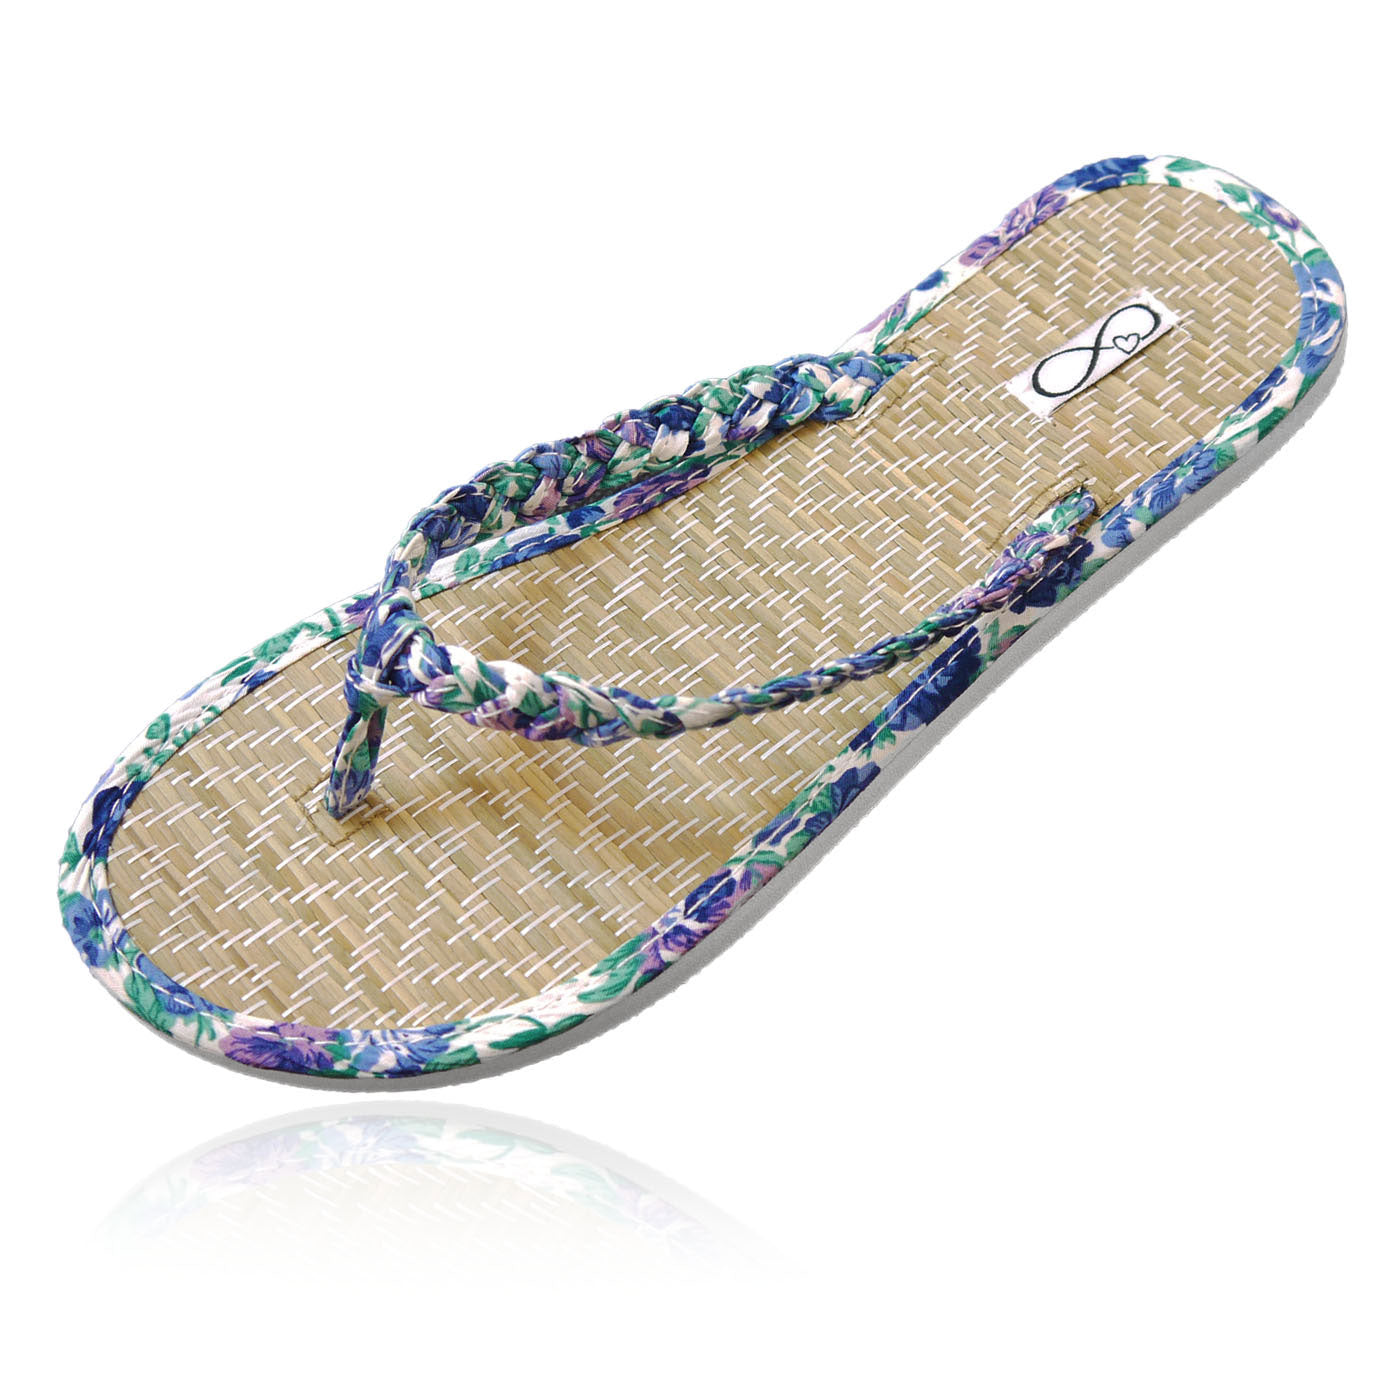 10 Pairs of blue beach flip-flops in a Party box